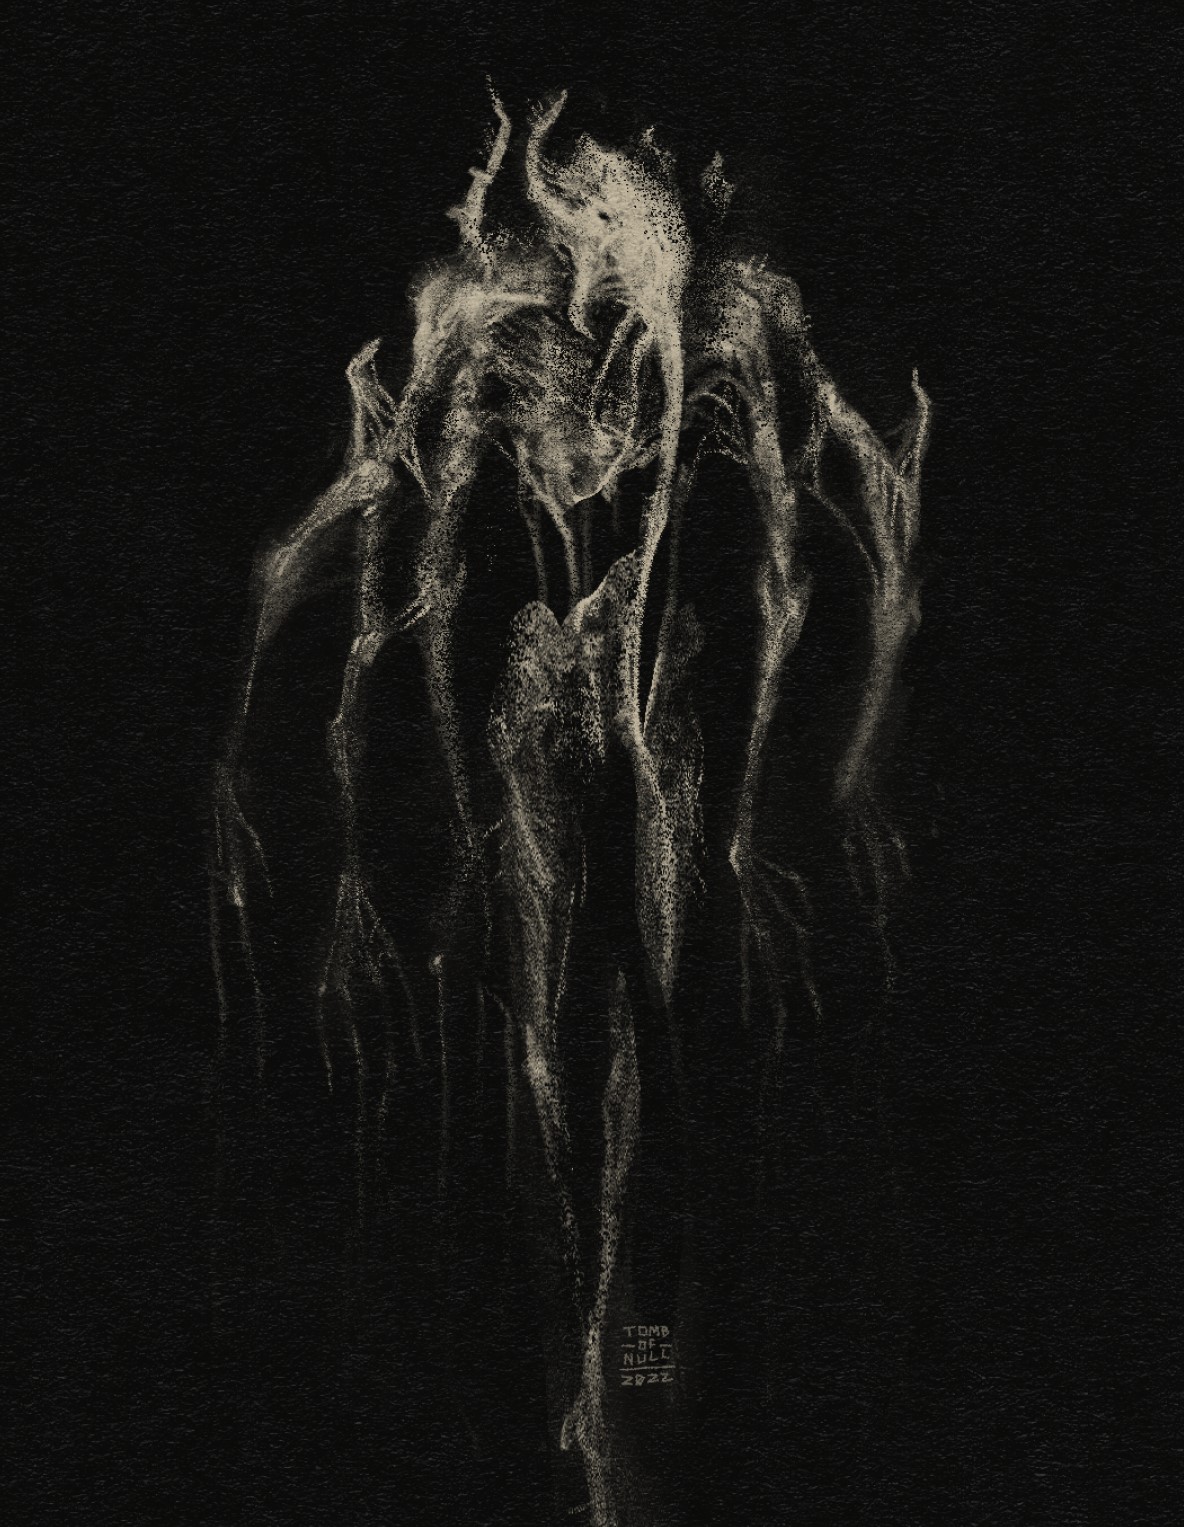 A sketch of a beastly, pale, ghostly creature with many long limbs and a difficult to discern face against a void-like background.